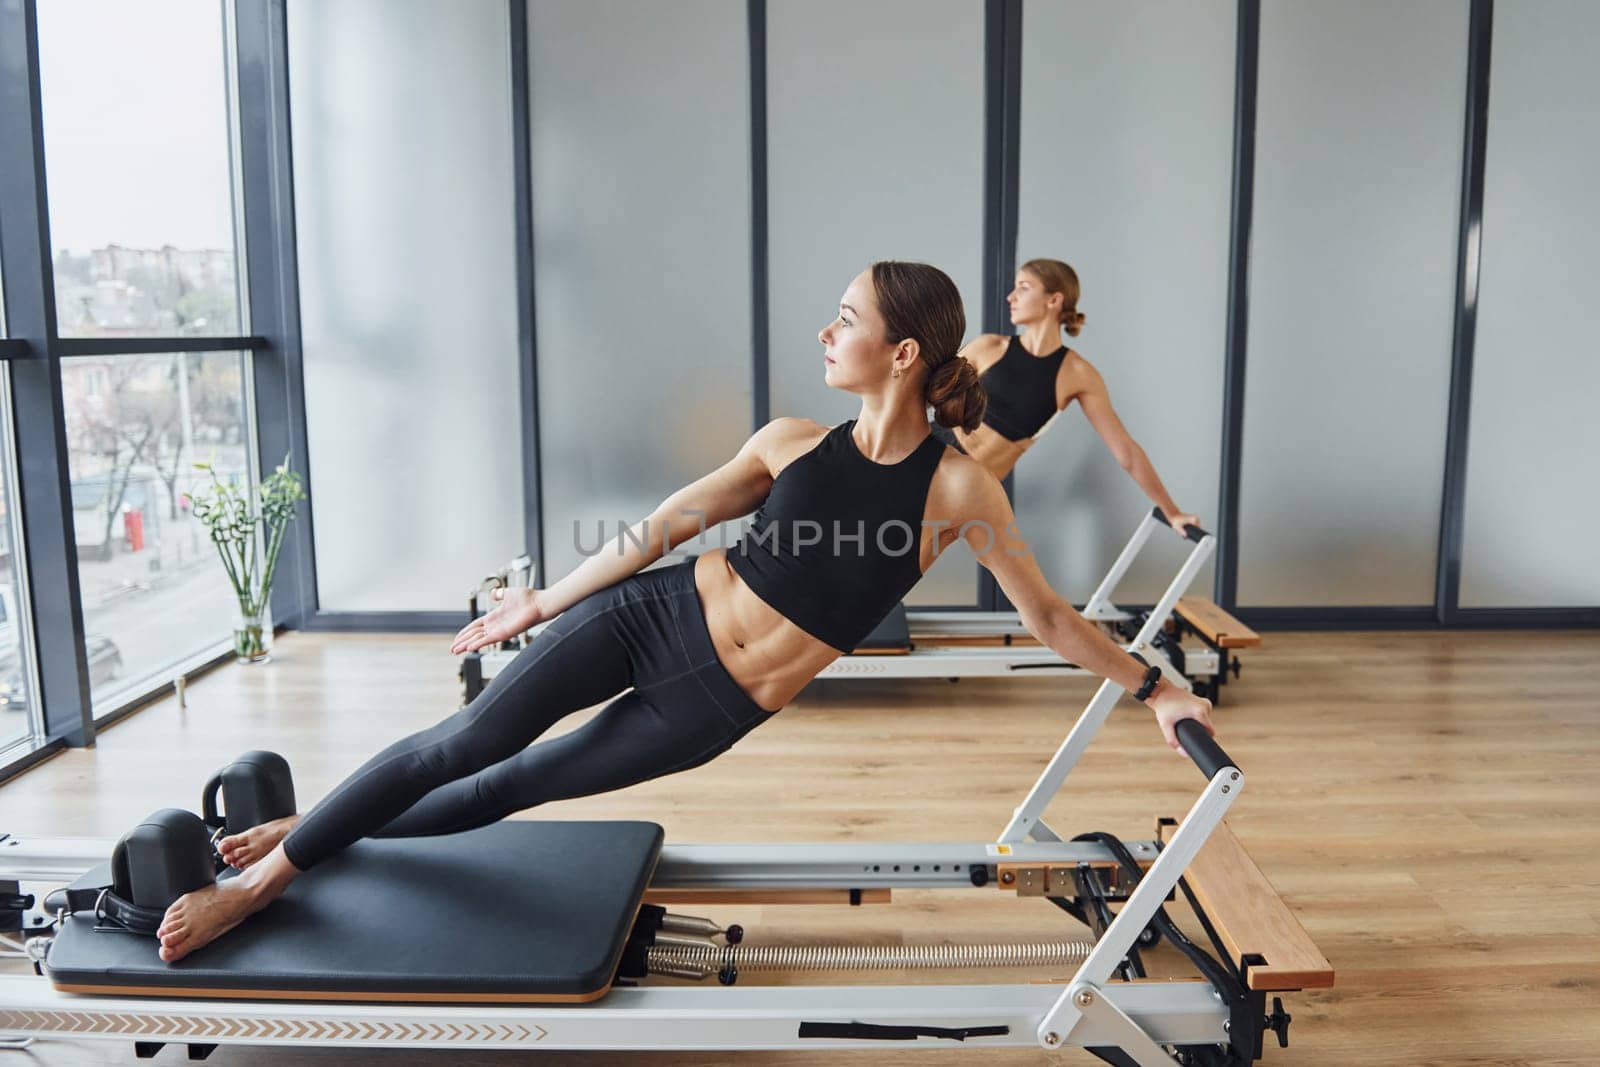 Standing on gym equipment and doing stretches. Two women in sportive wear and with slim bodies have fitness yoga day indoors together.